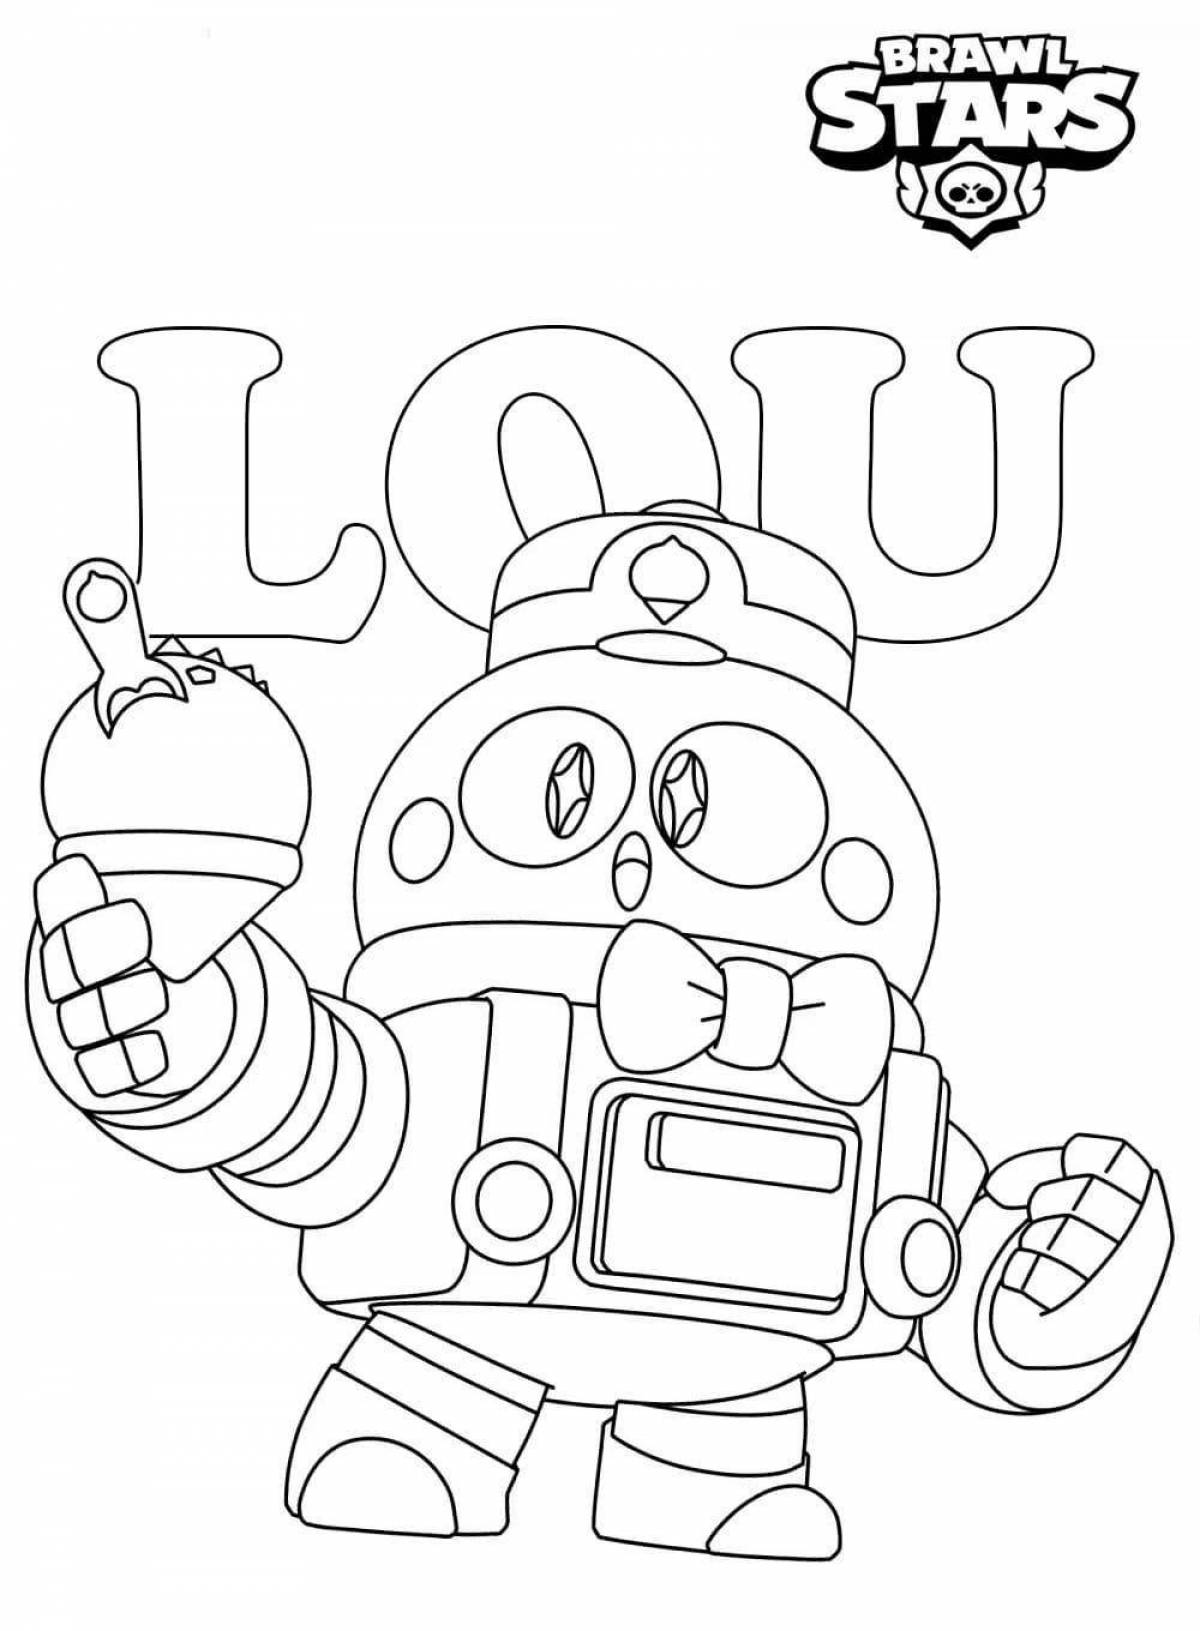 Brawl star awesome coloring book